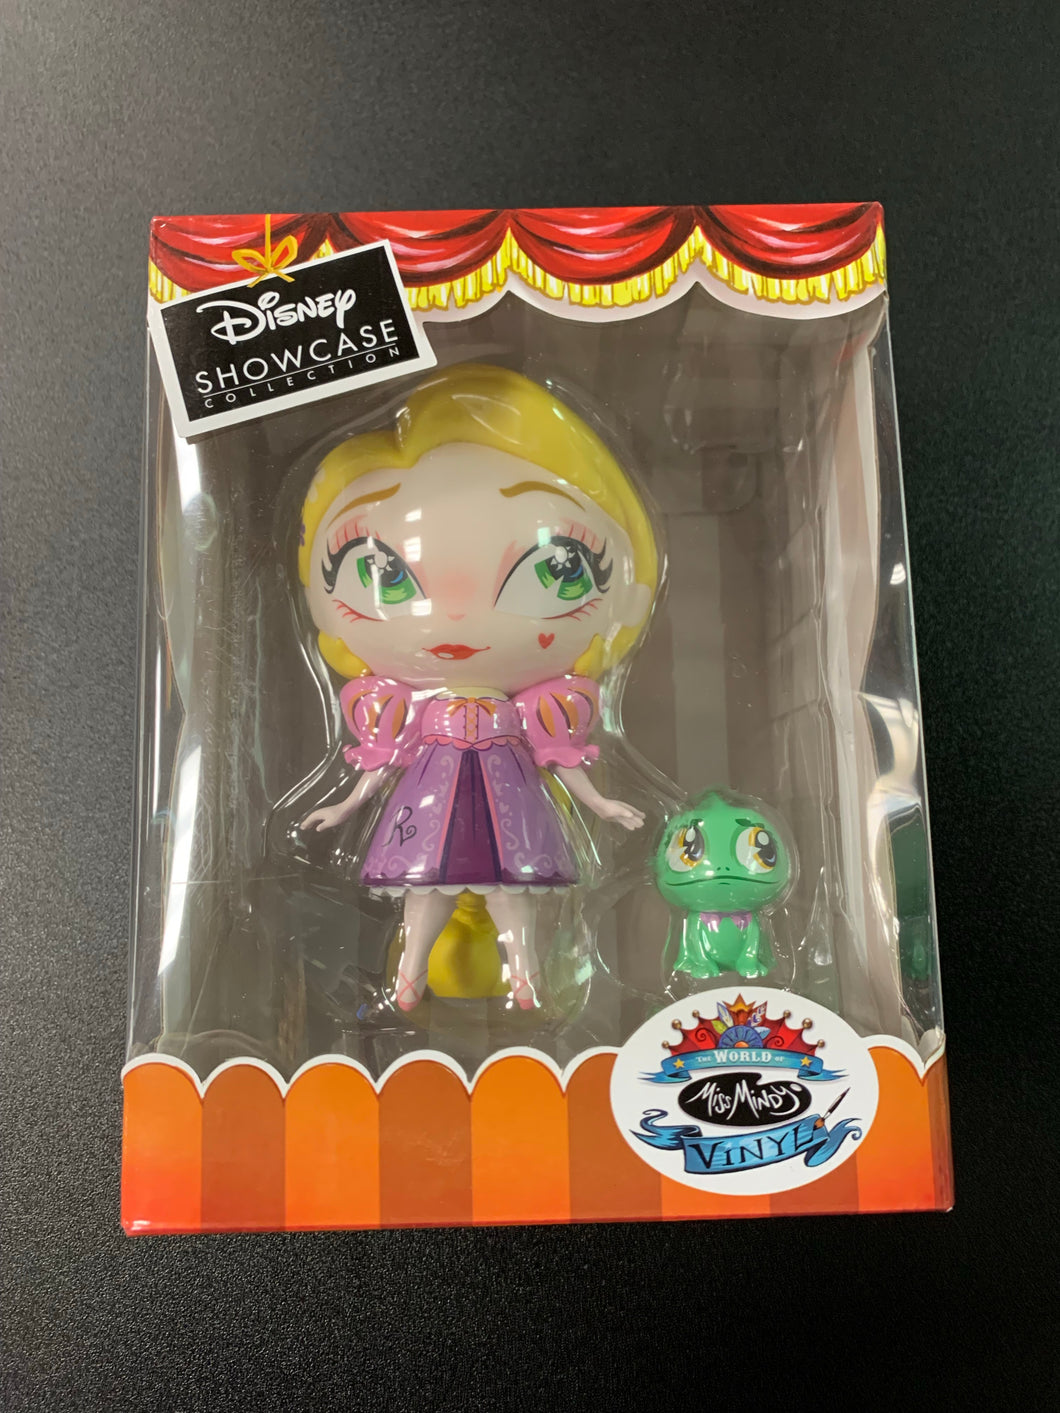 DISNEY SHOWCASE COLLECTION THE WORLD OF MISS MINDY VINYL TANGLED RAPUNZEL WITH PASCAL FIGURE